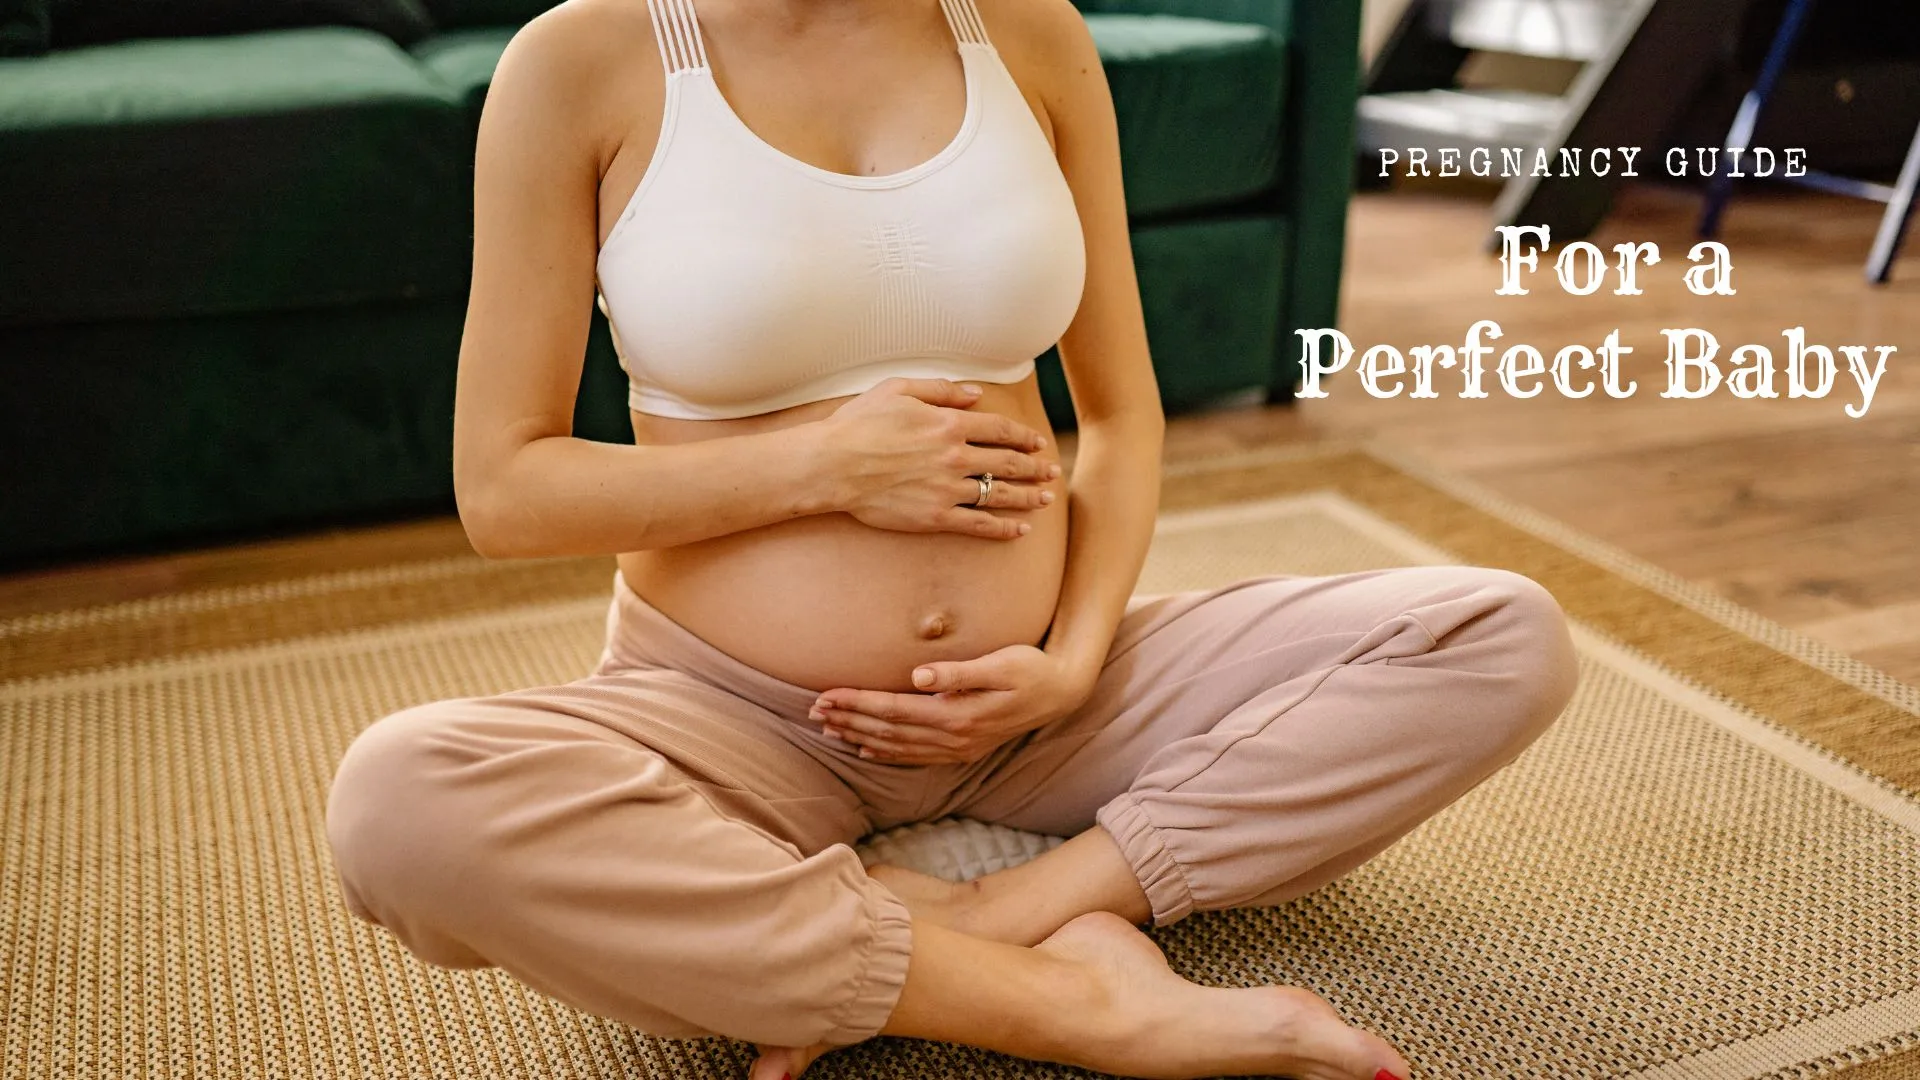 Pregnancy Guide for a Perfect Baby